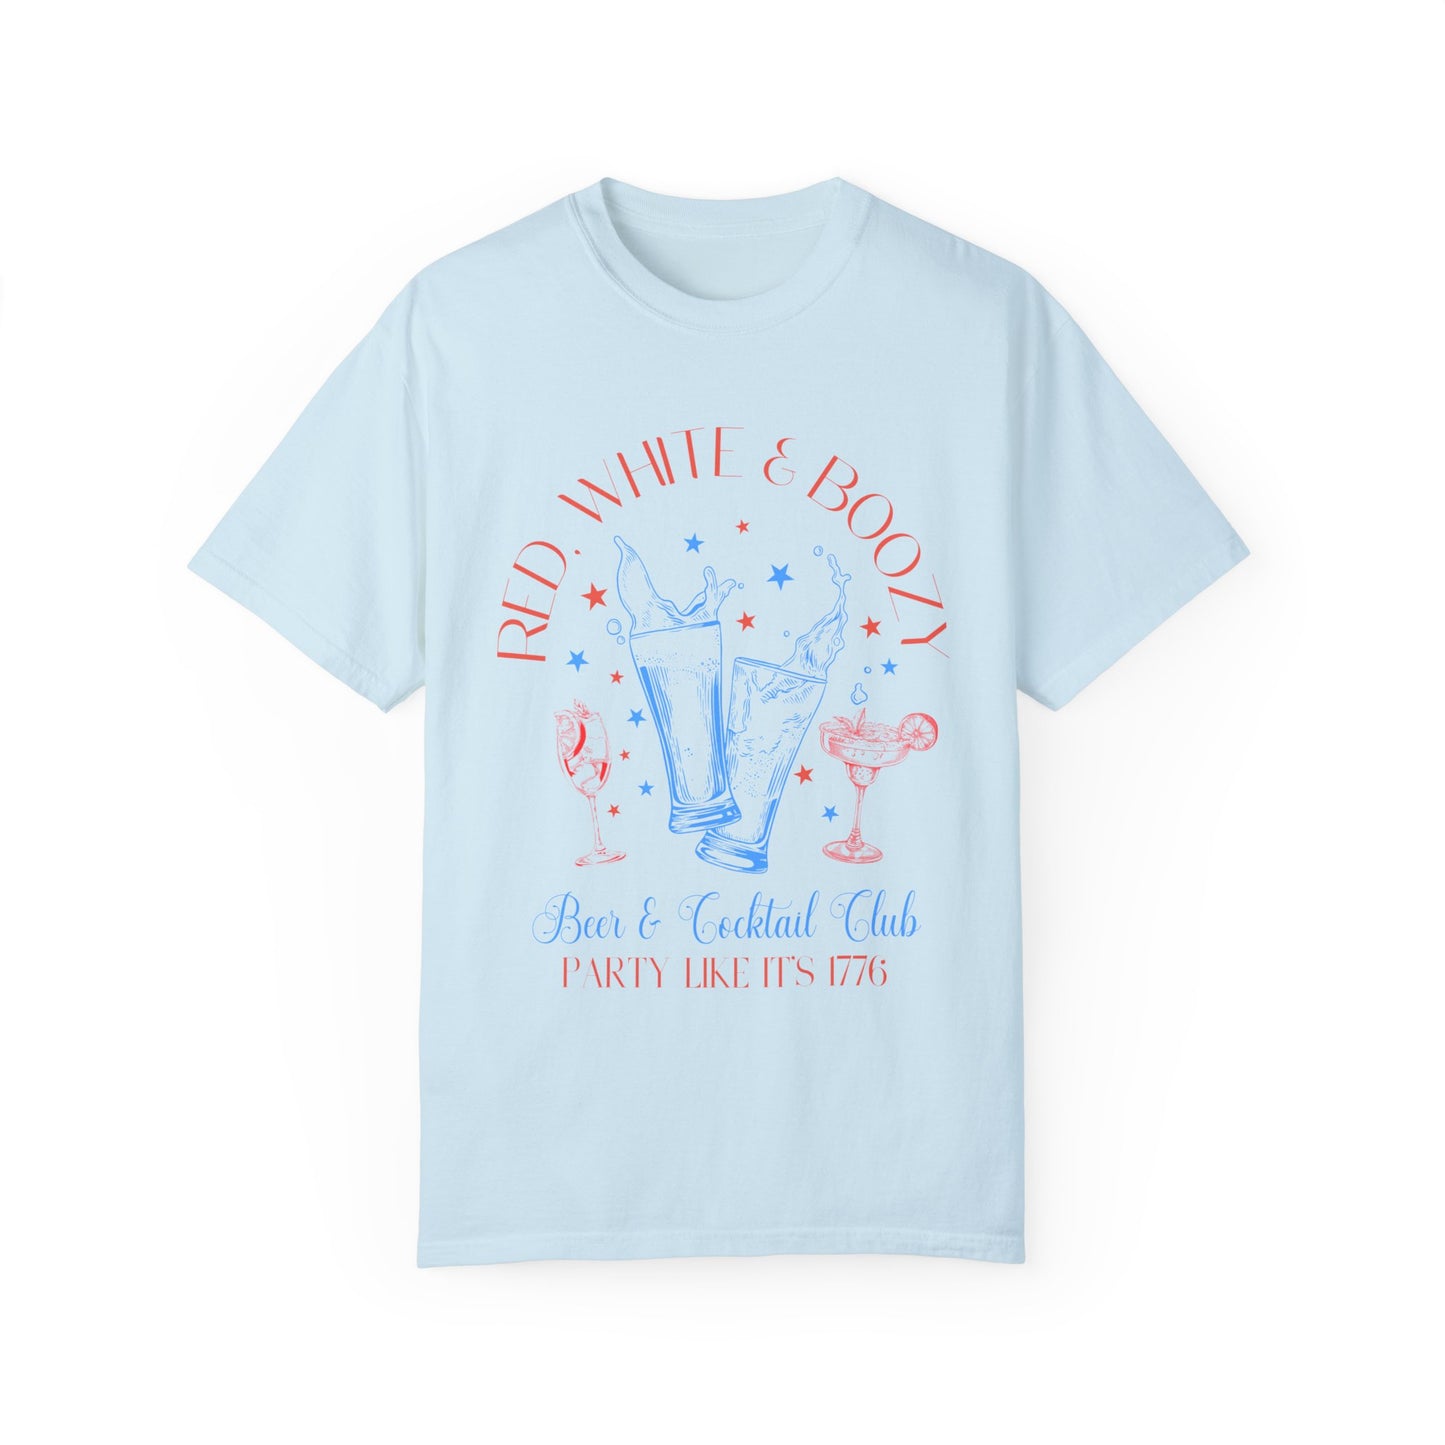 Red White and Boozy Social Club Garment-Dyed T-shirt